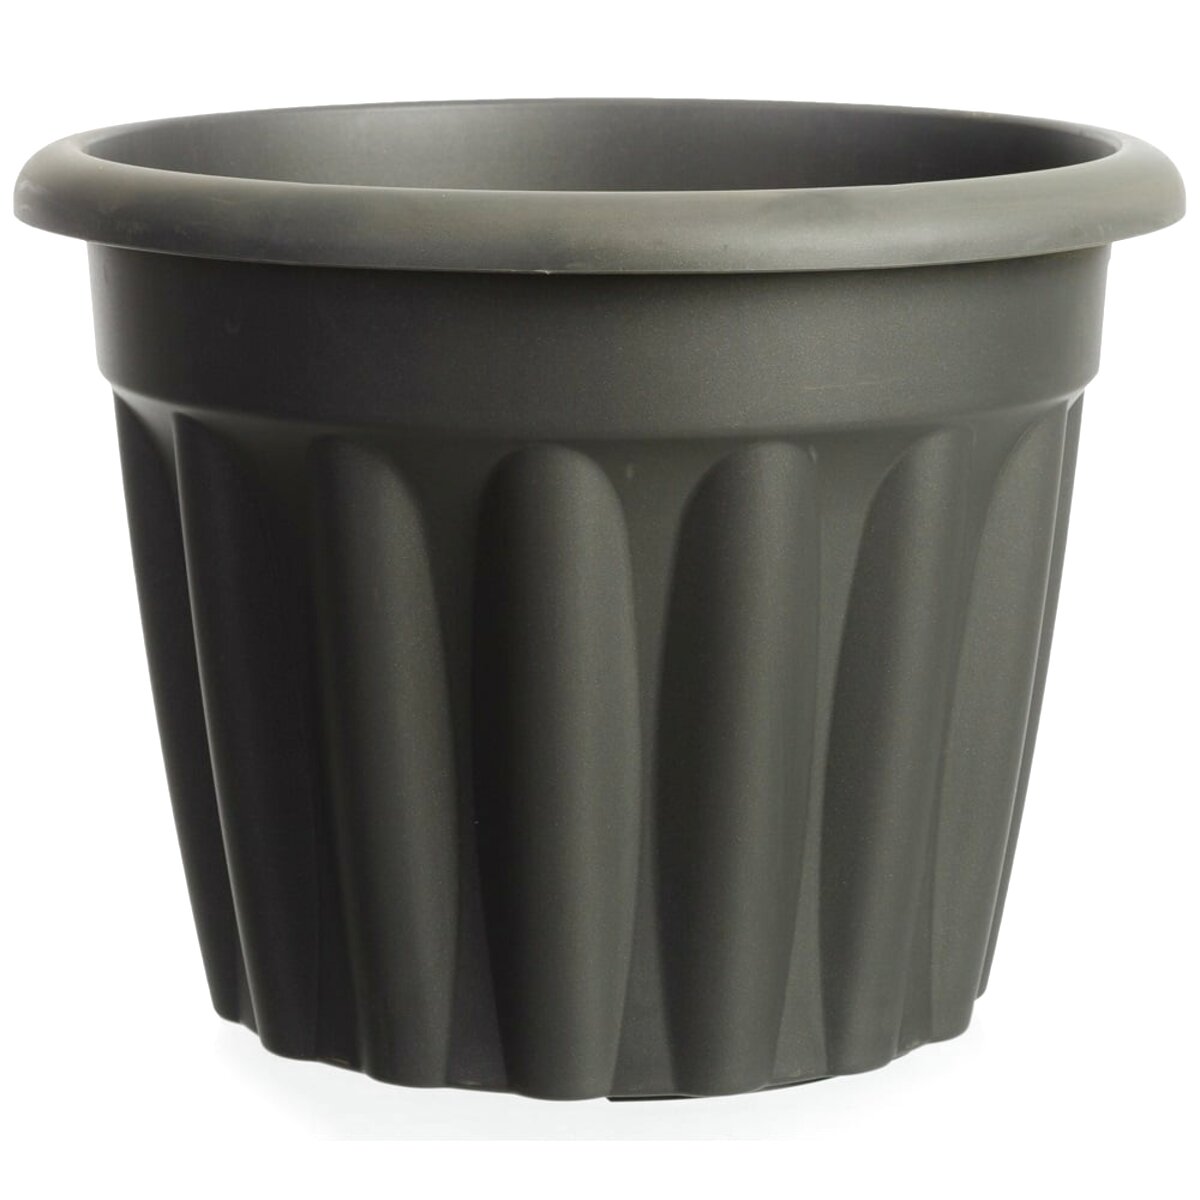  Extra Large Plastic Plant Pots  for sale in UK